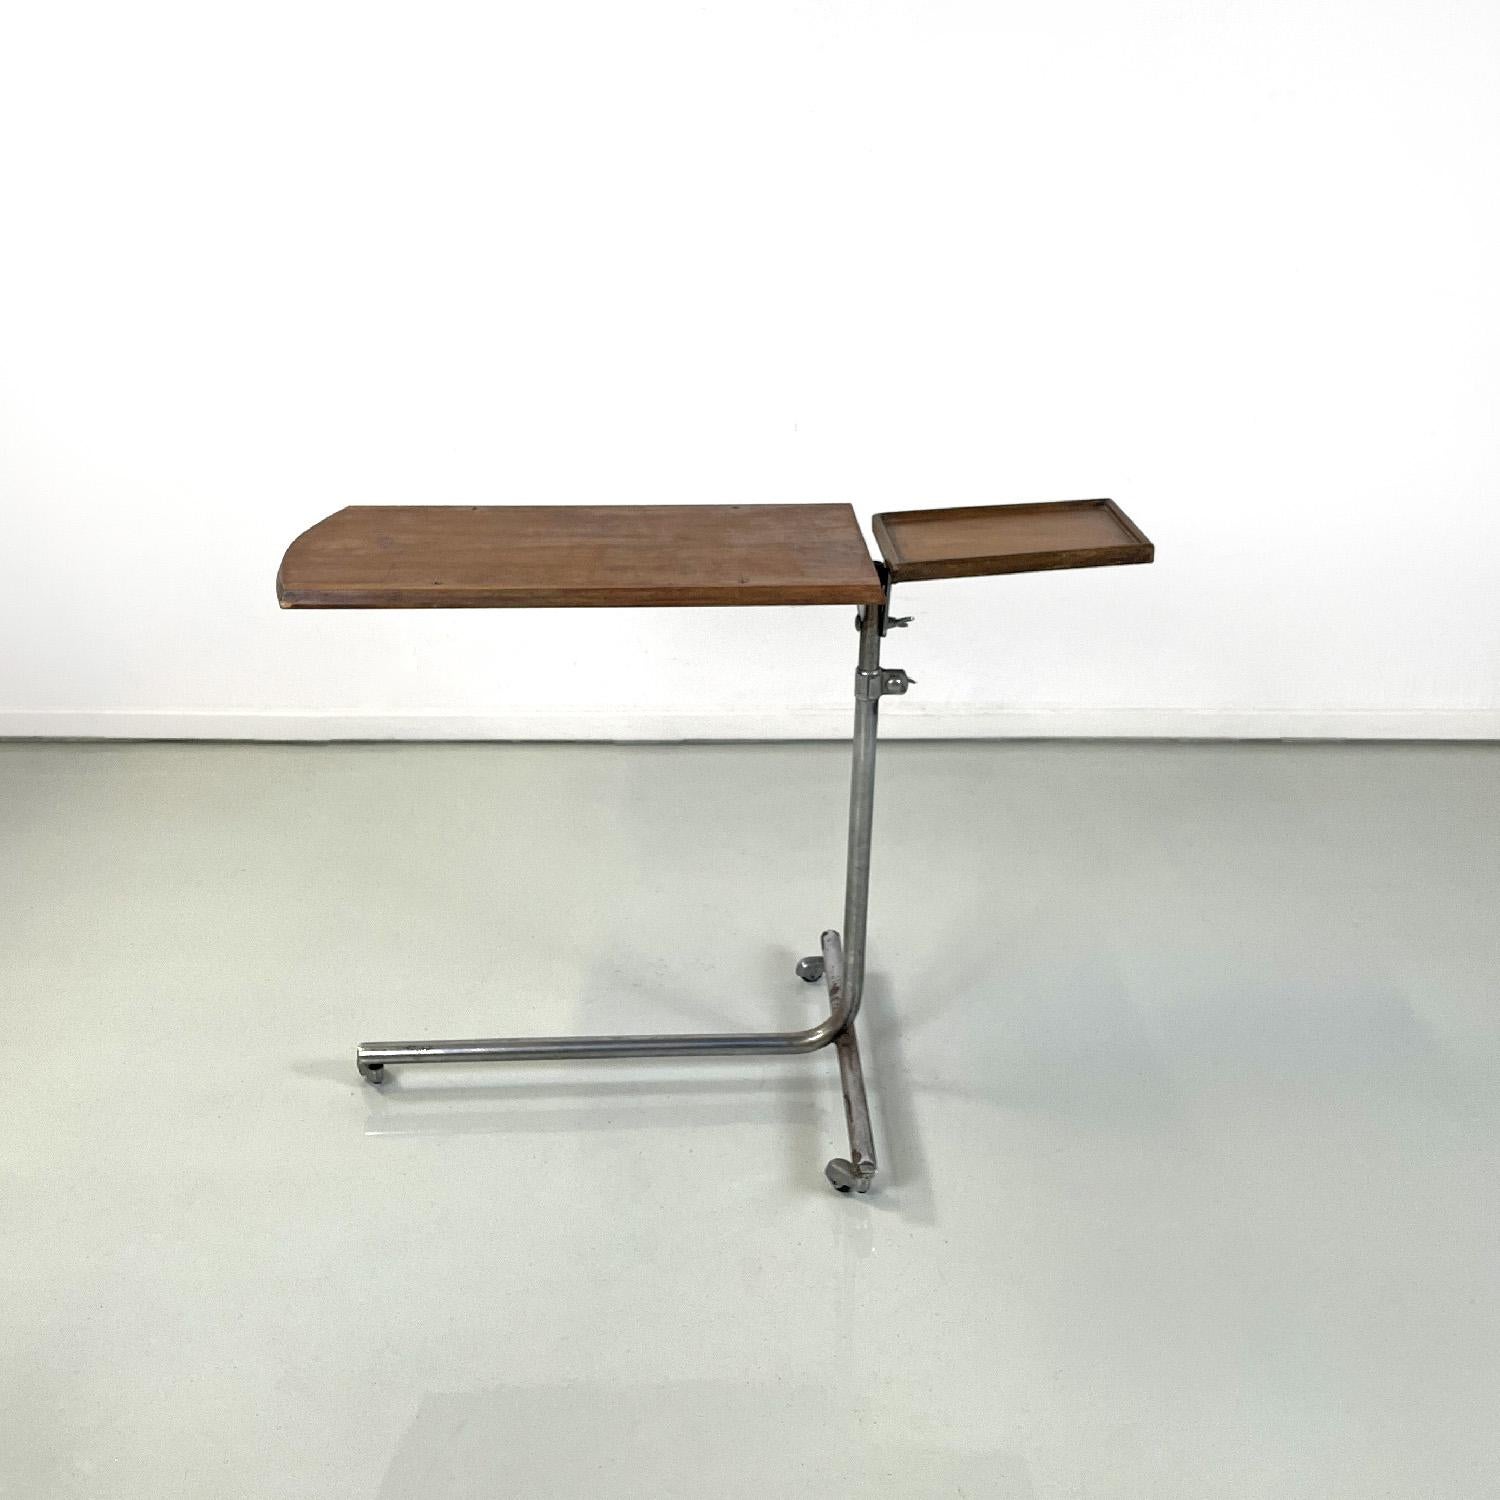 Italian mid-century modern wood and metal industrial work table, 1960s In Fair Condition For Sale In MIlano, IT